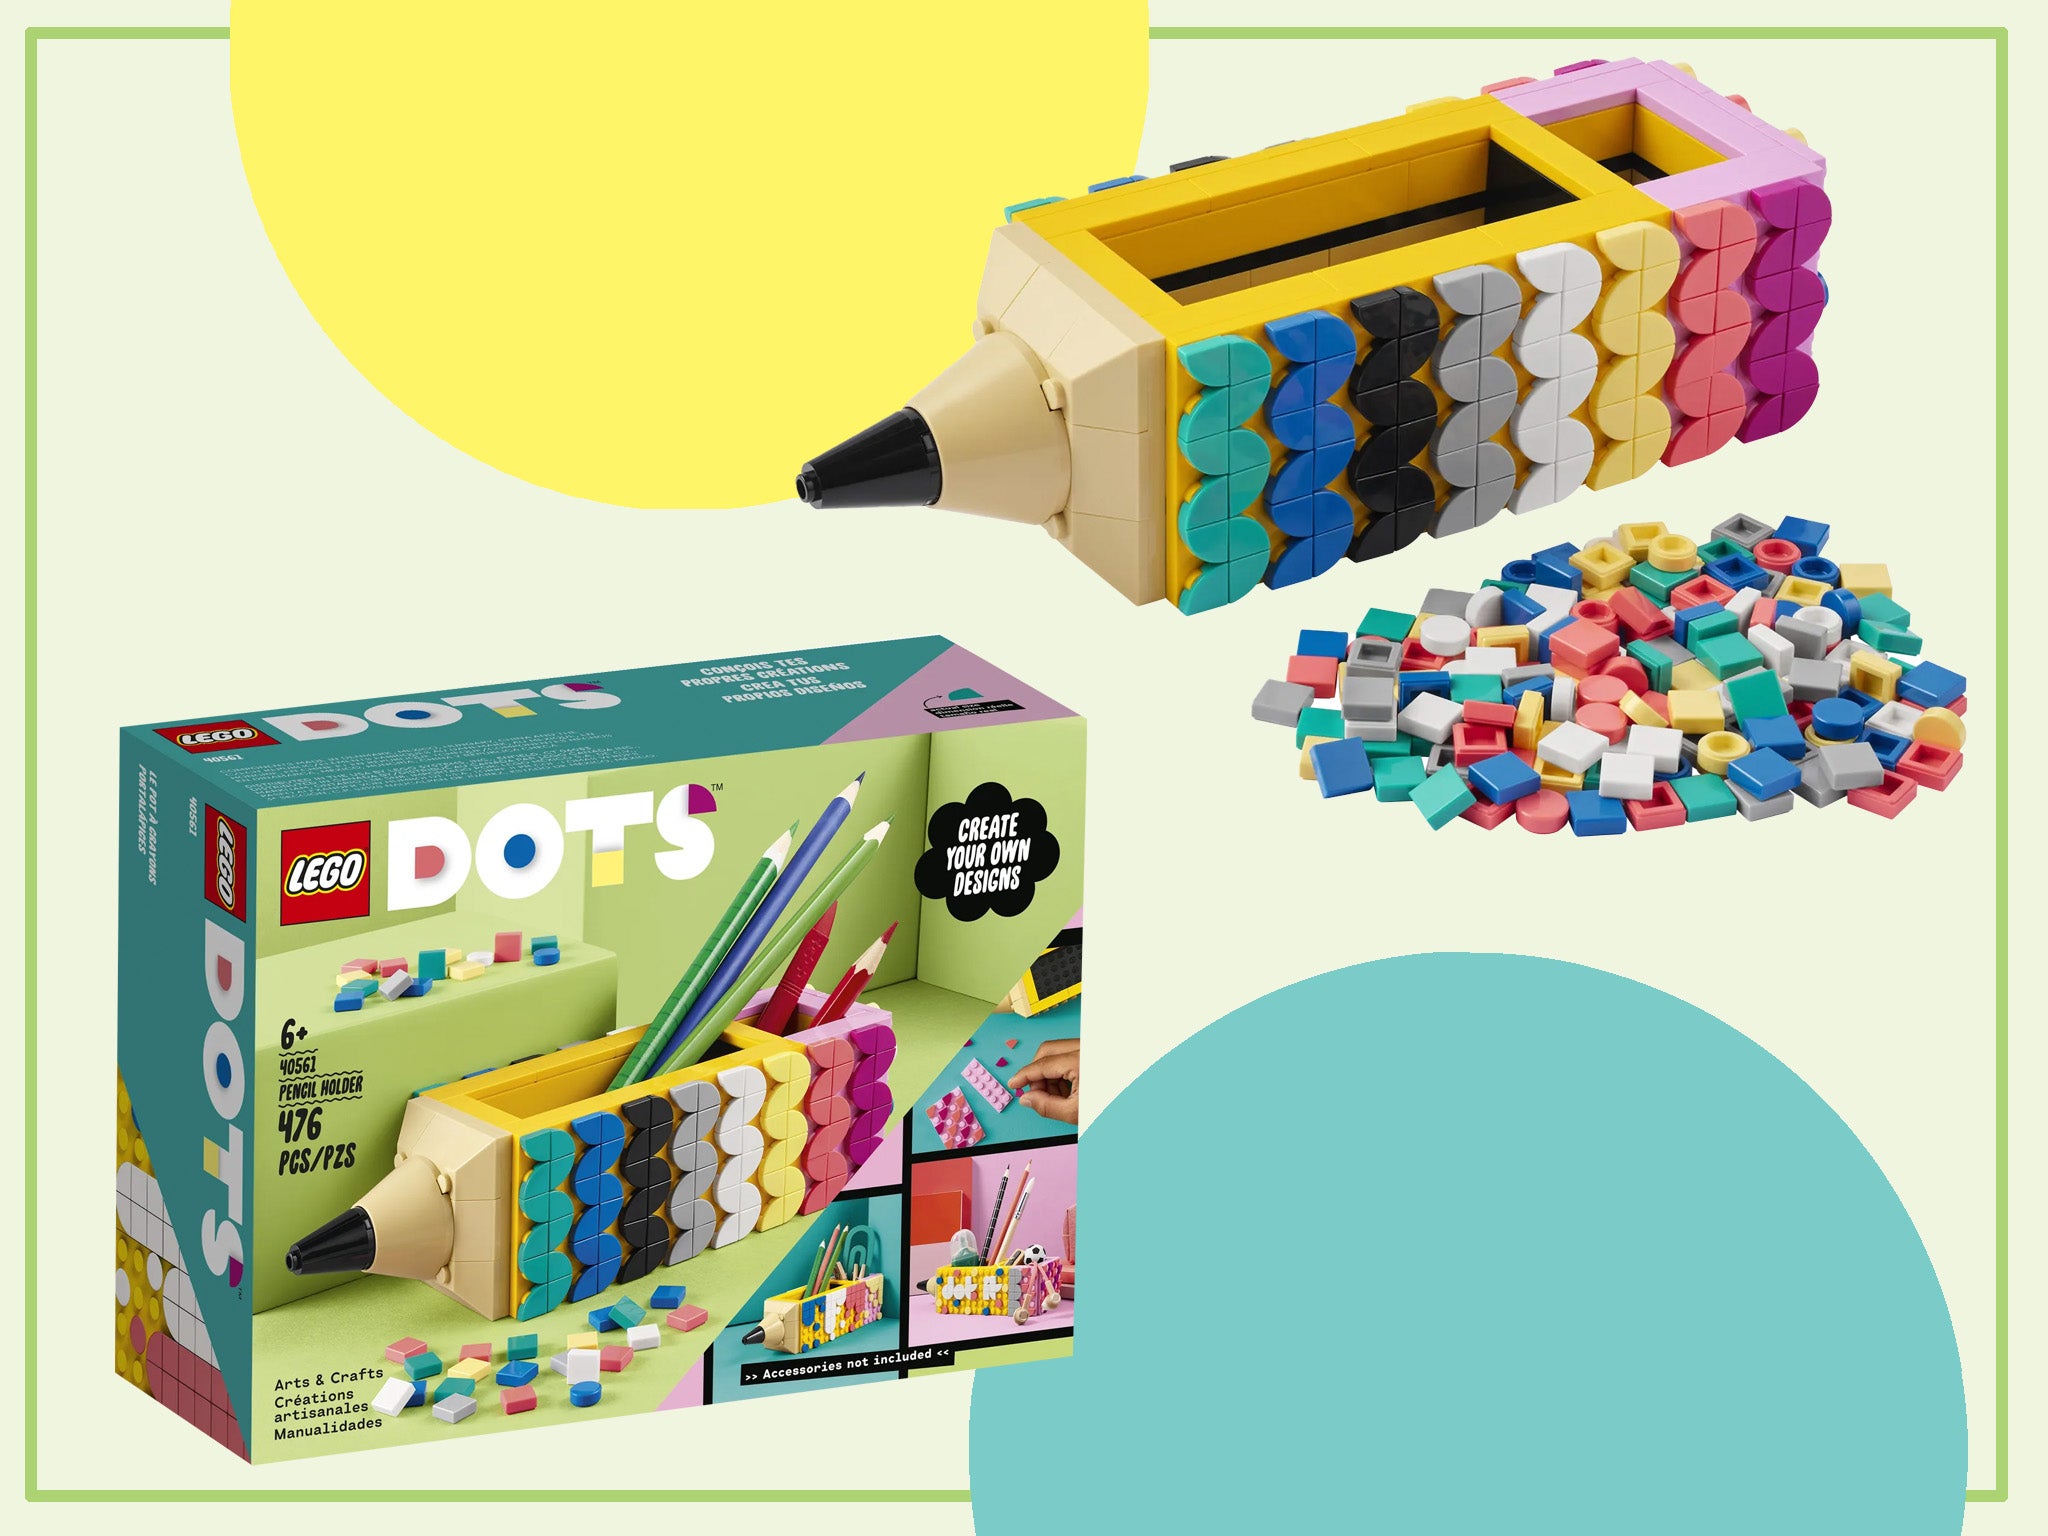 The £13.49 set is free when you spend £65 or more on the Lego dots, city or friends range